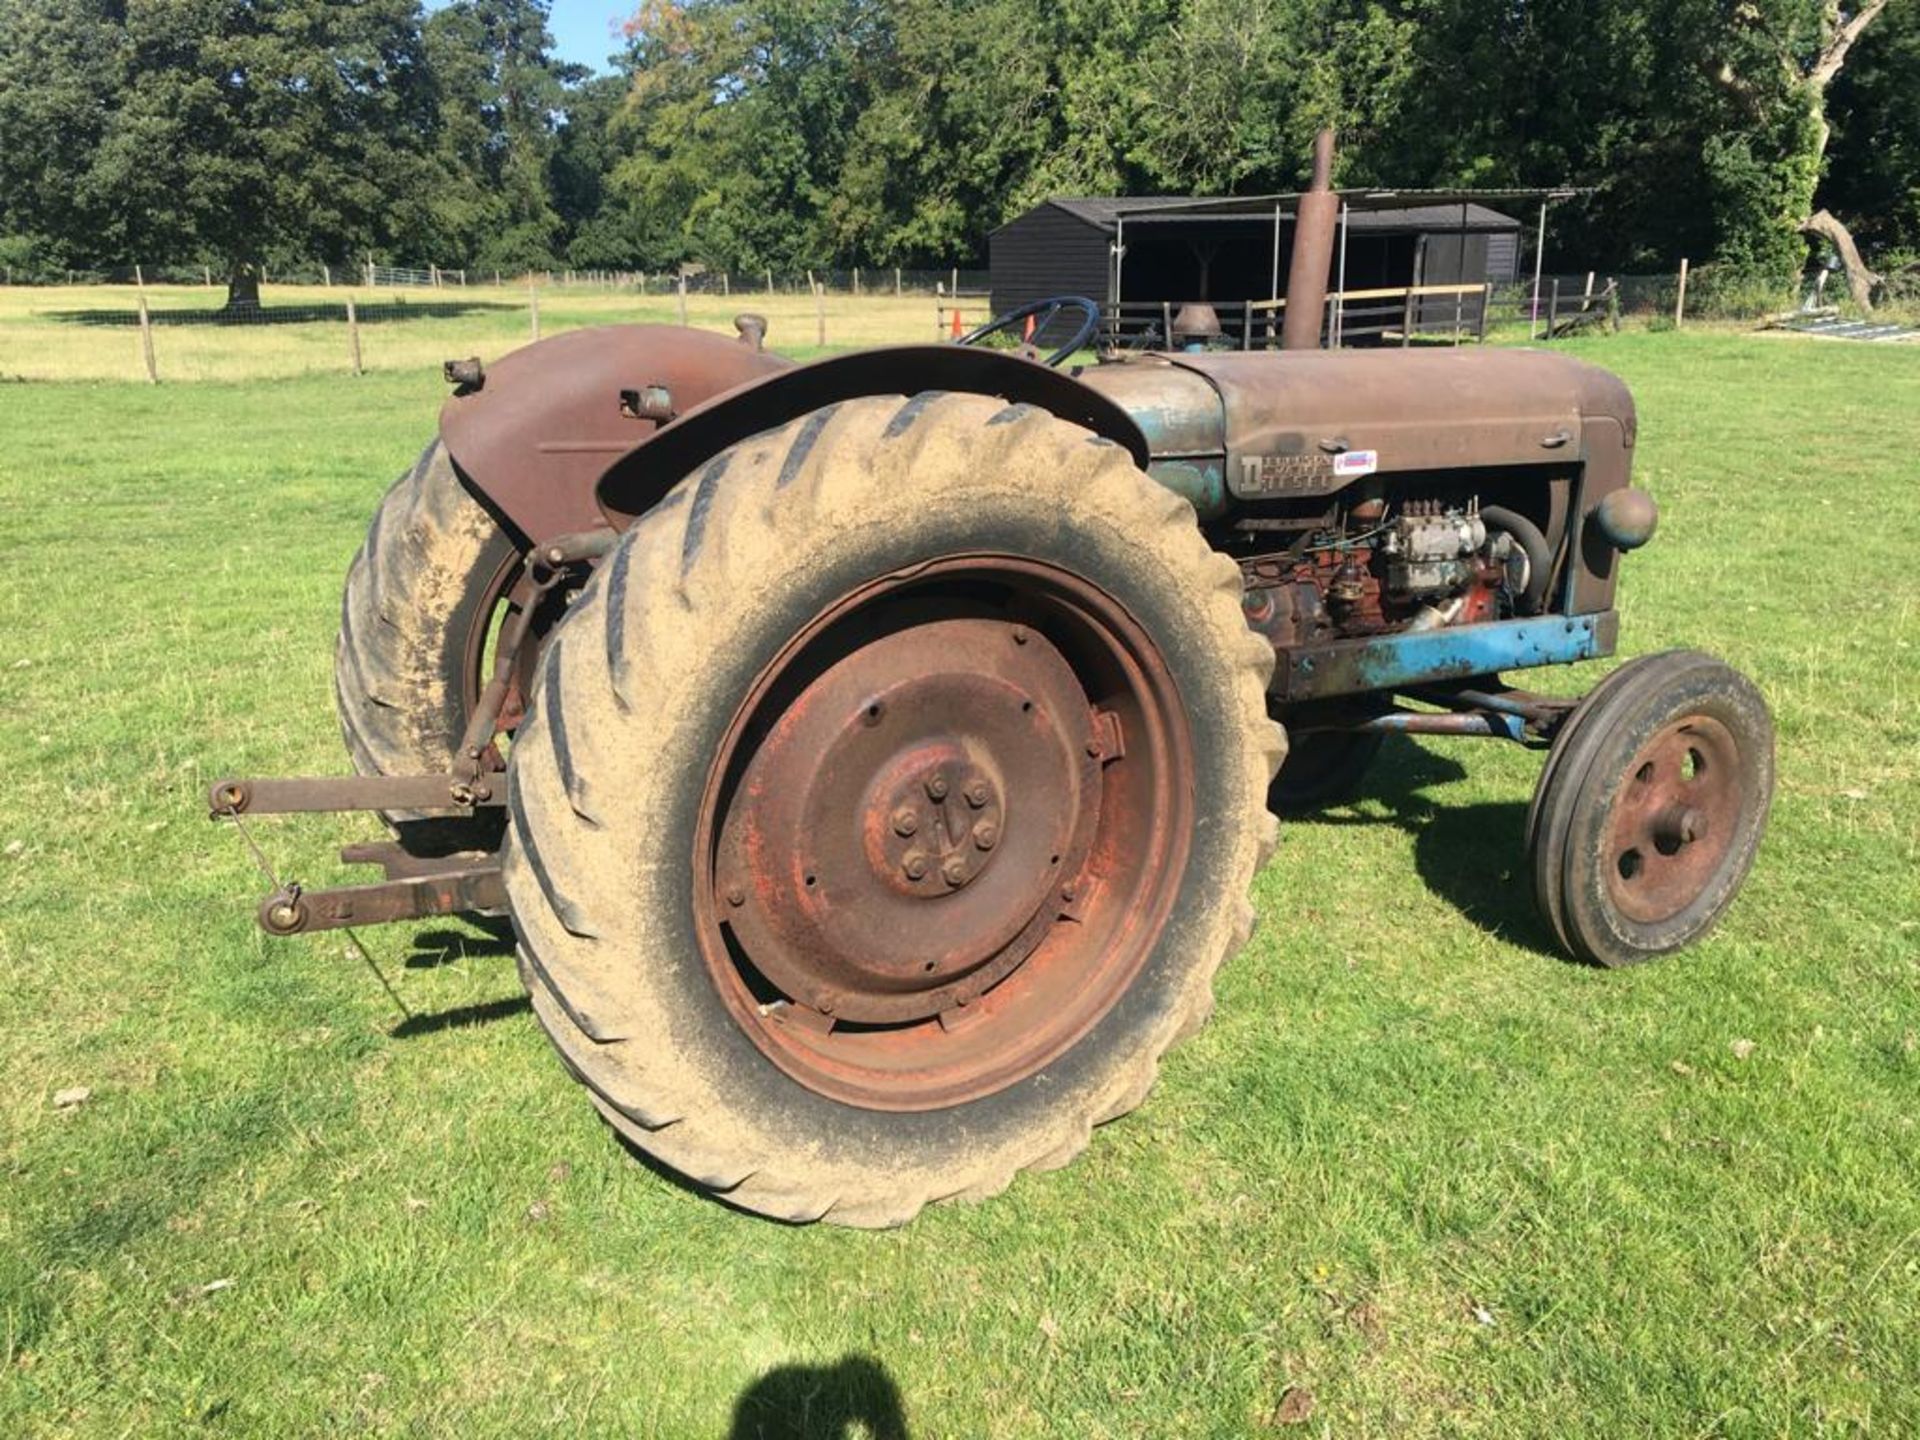 1952 Fordson Major E1A Major. Starts and runs well, new front tyres. Stored near Norwich, Norfolk. - Image 2 of 4